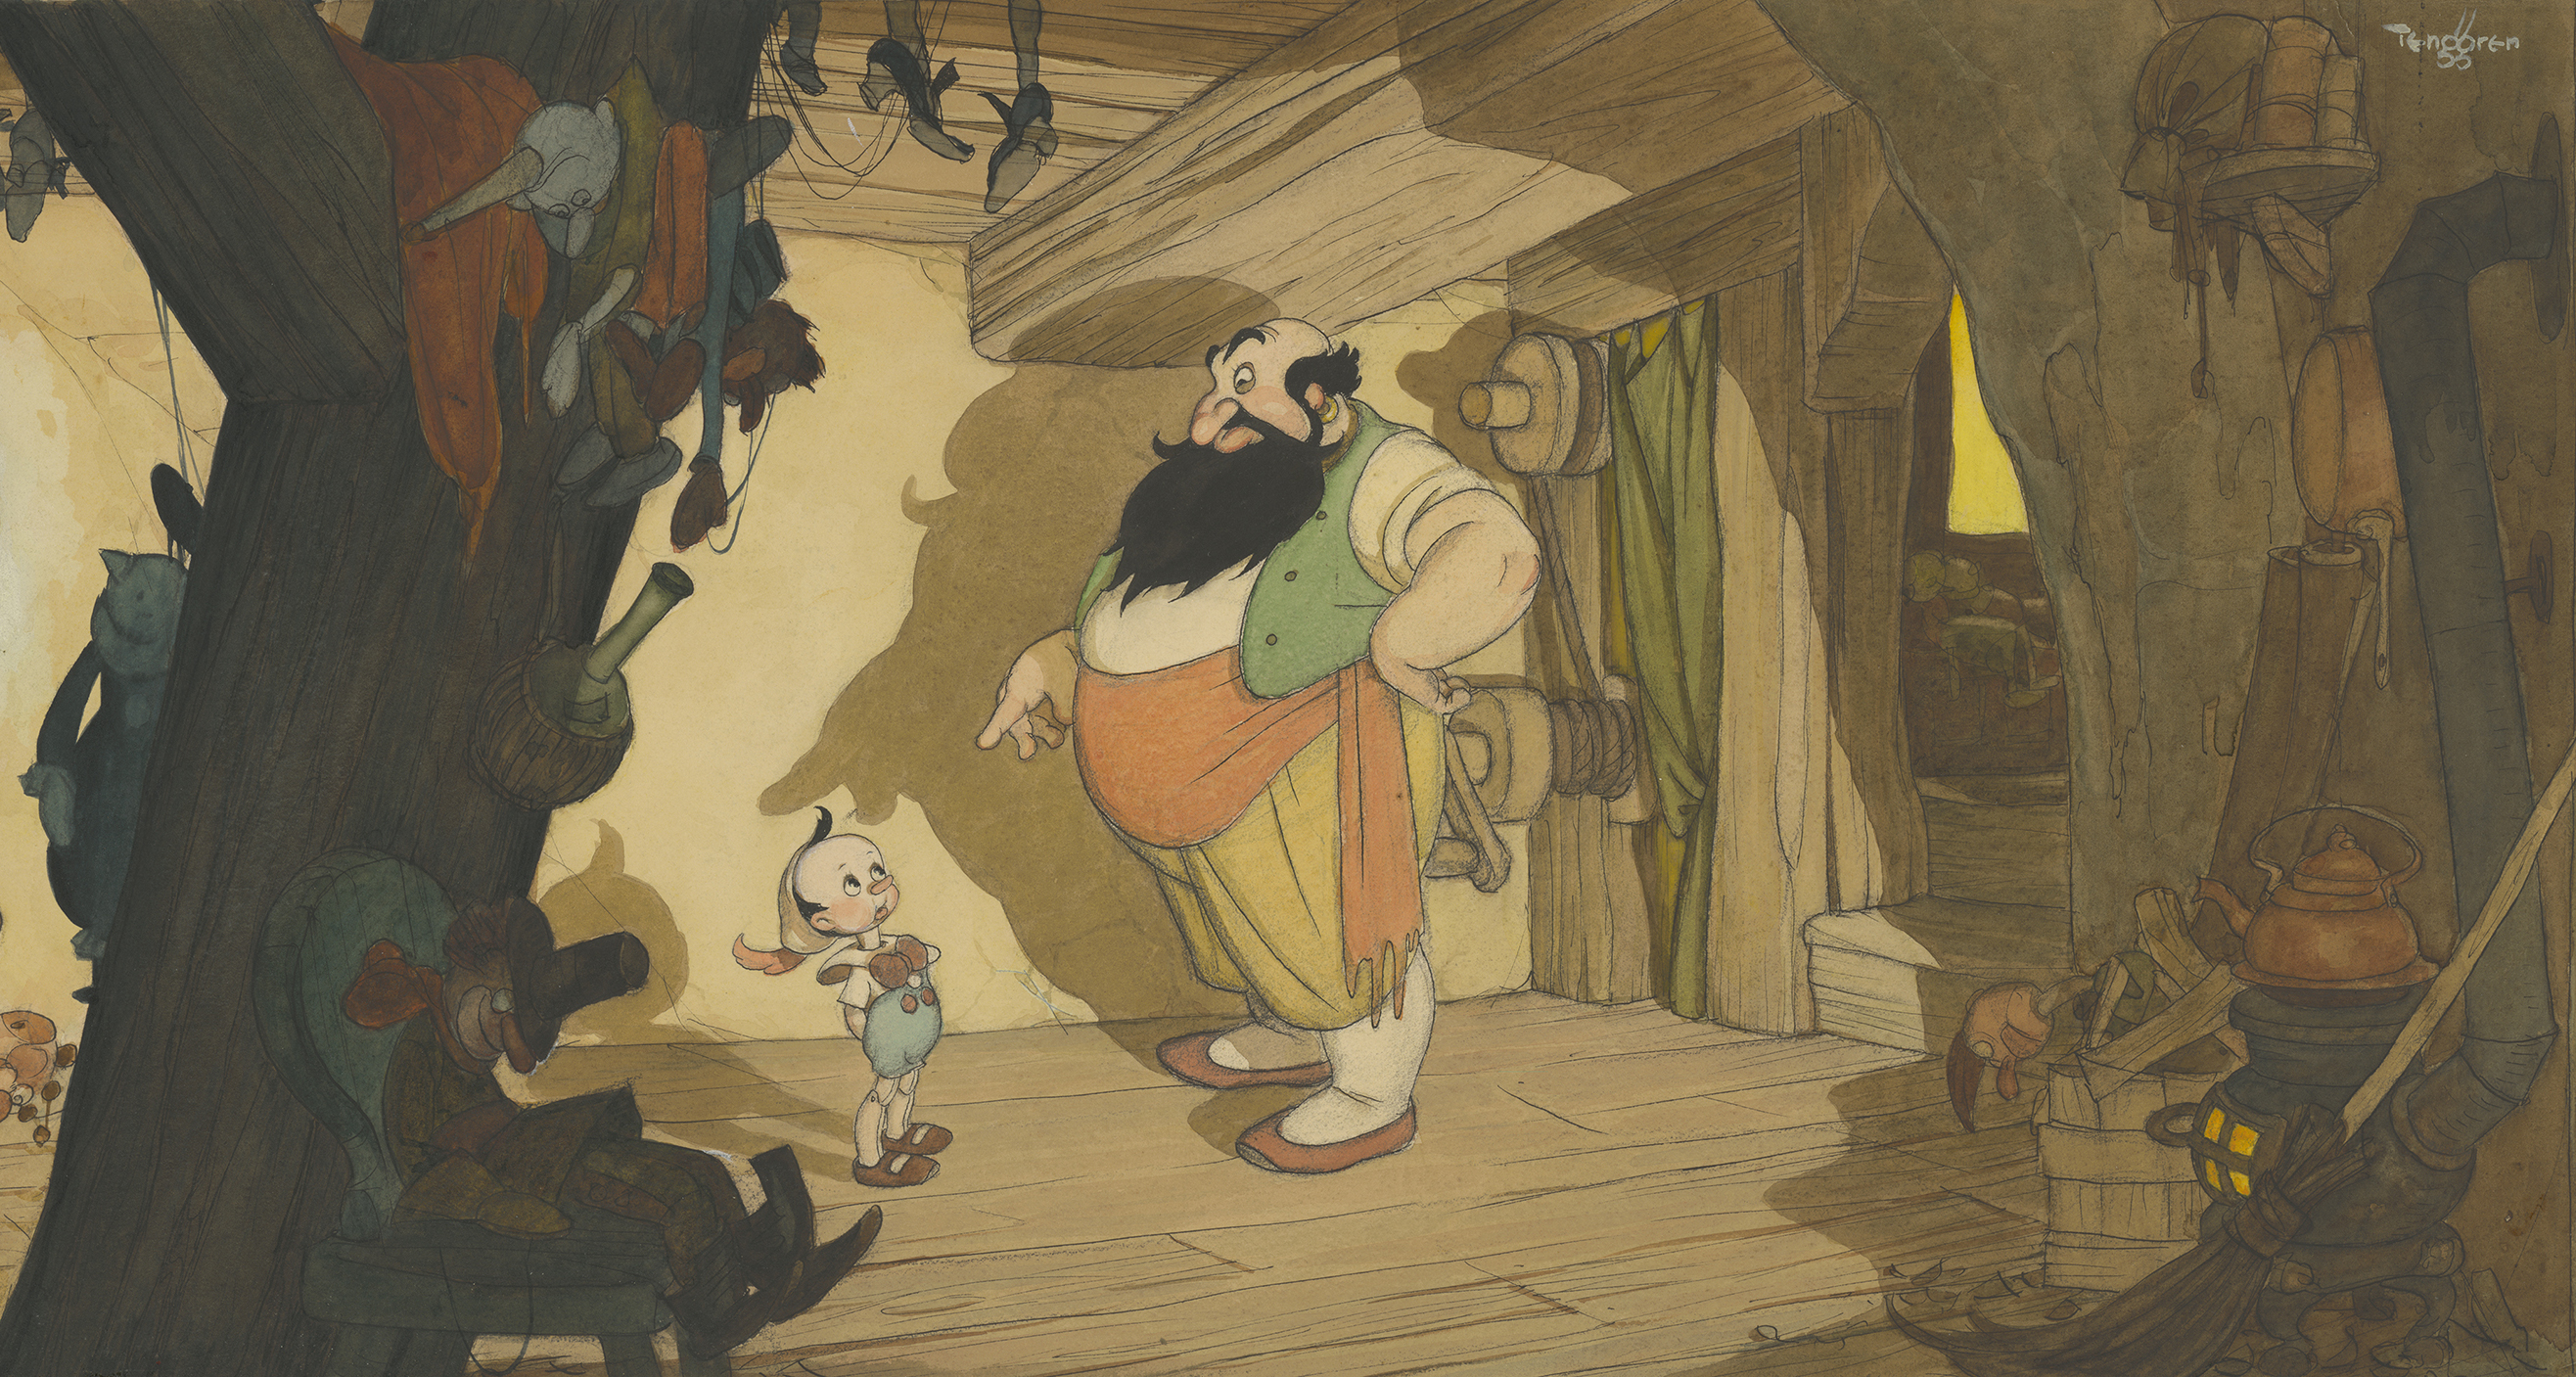 Wish Upon a Star: The Art of Pinocchio